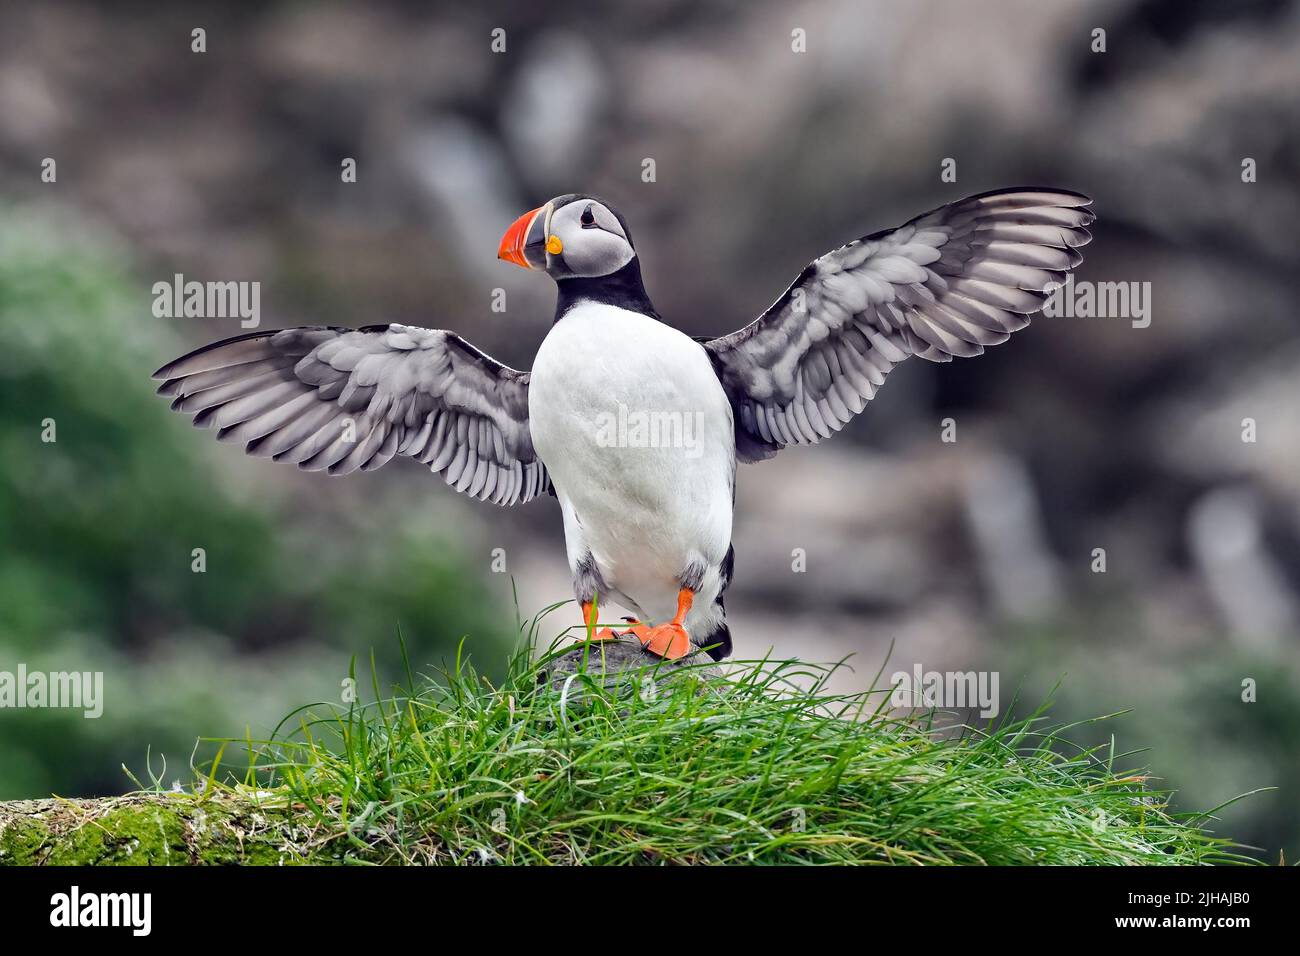 Puffin is doing pre-flight checks Stock Photo